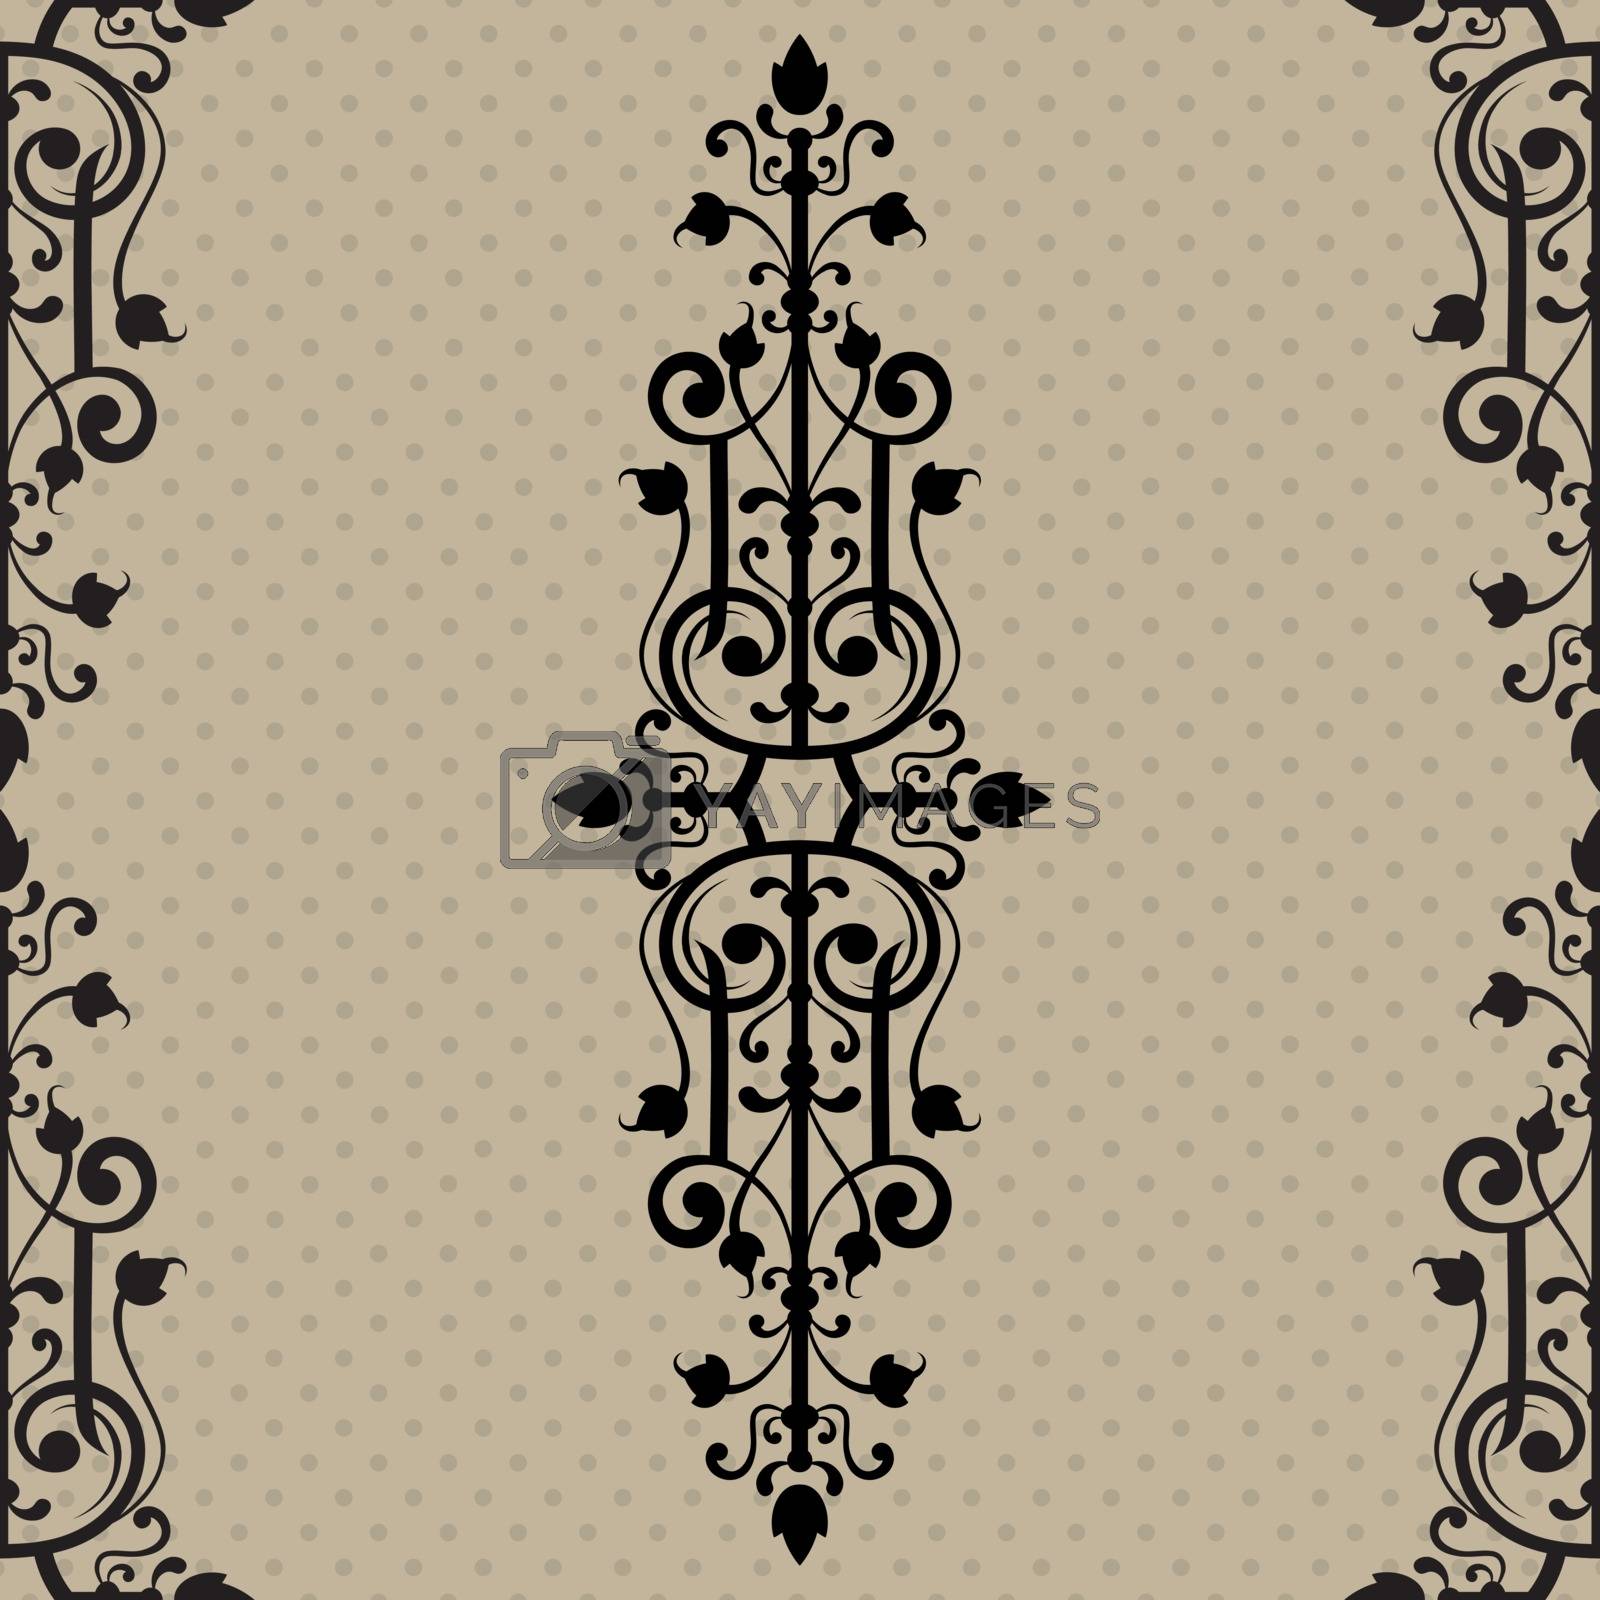 Royalty free image of Vintage frame with black ornament by iktash